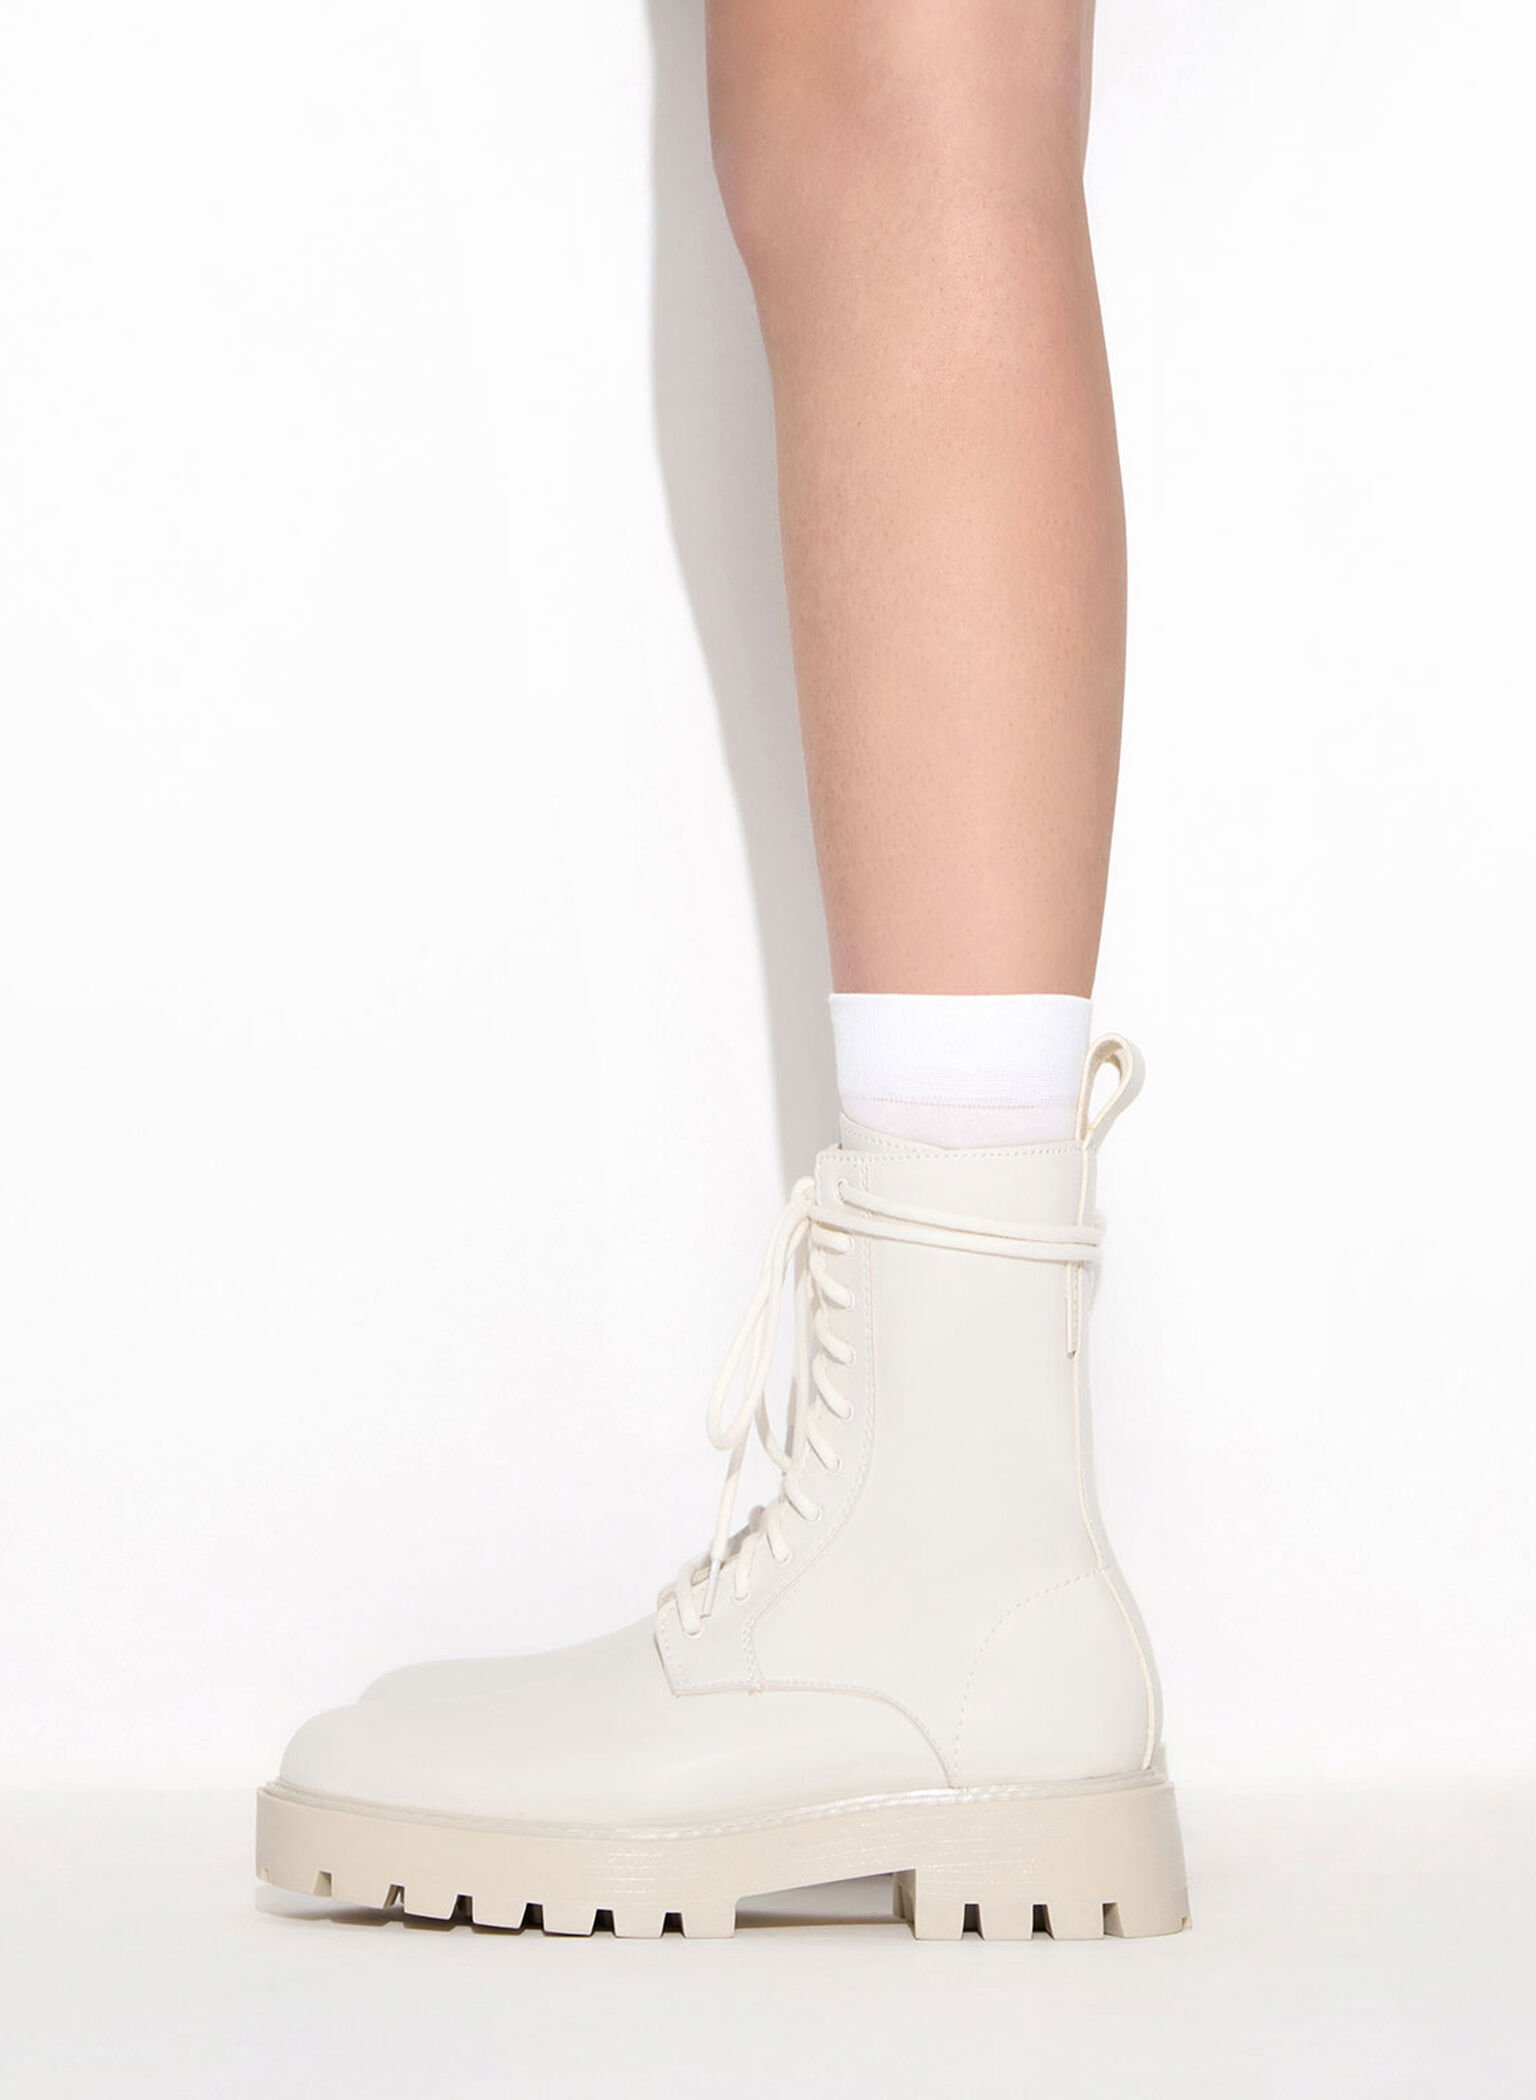 Chalk Gripped Soles Combat Boots - CHARLES & KEITH SG